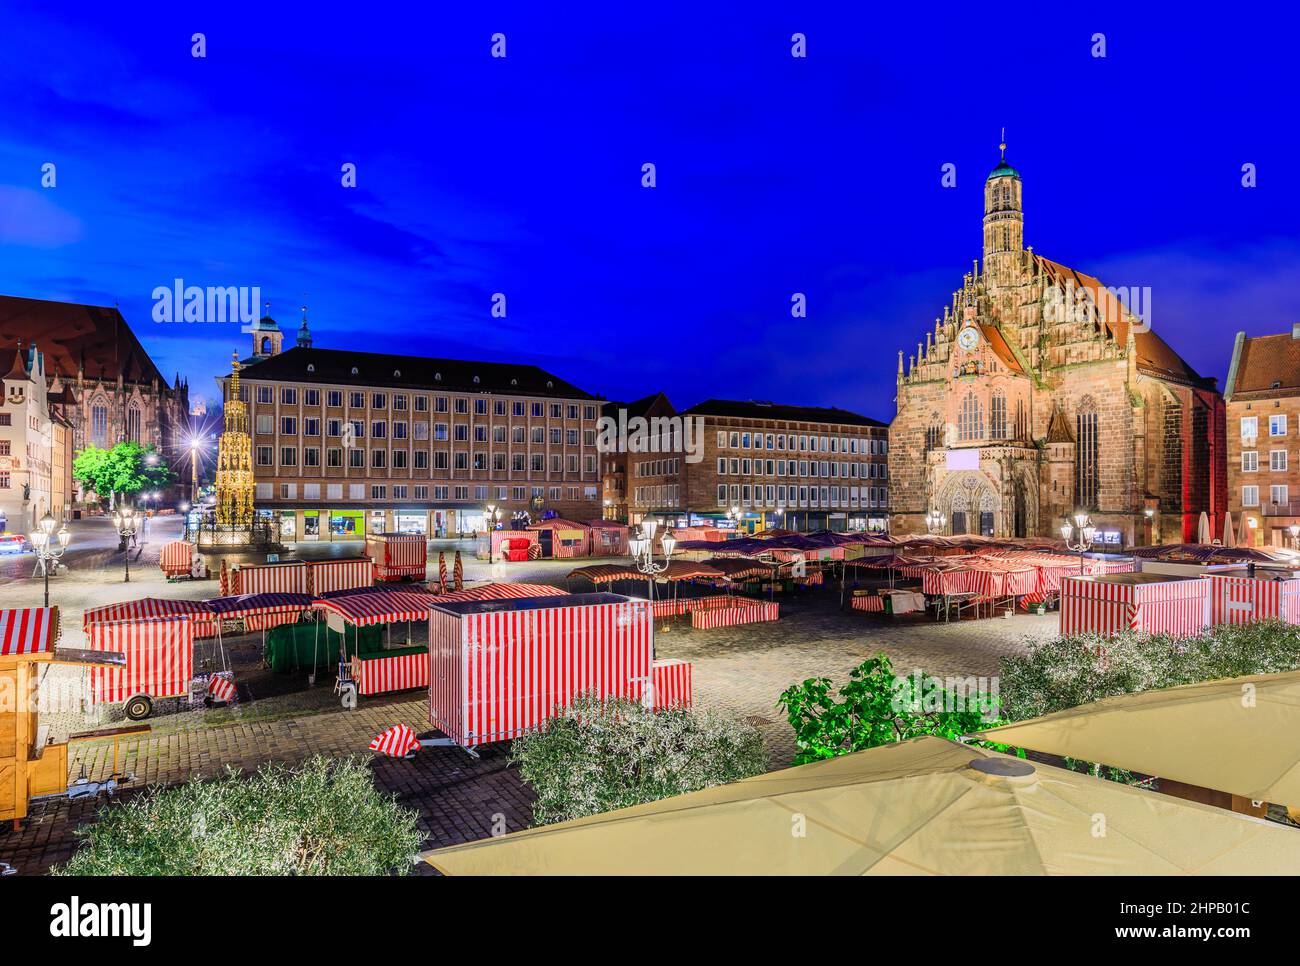 Nuremberg, Germany. The market square in the old town of Nuremberg, Bavaria. Stock Photo